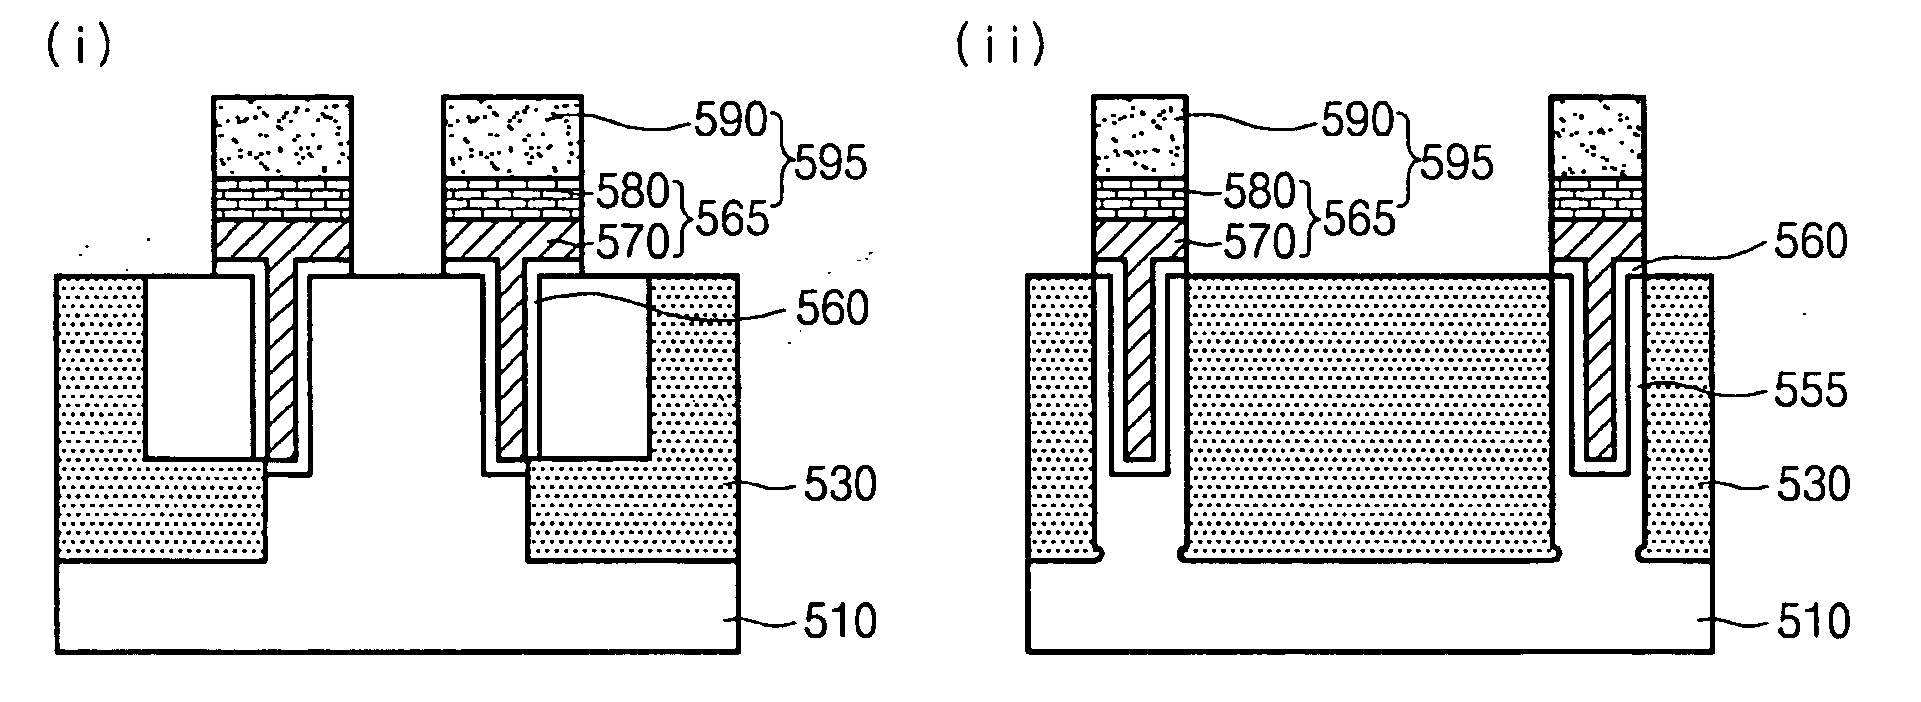 Semiconductor device having a recess channel transistor